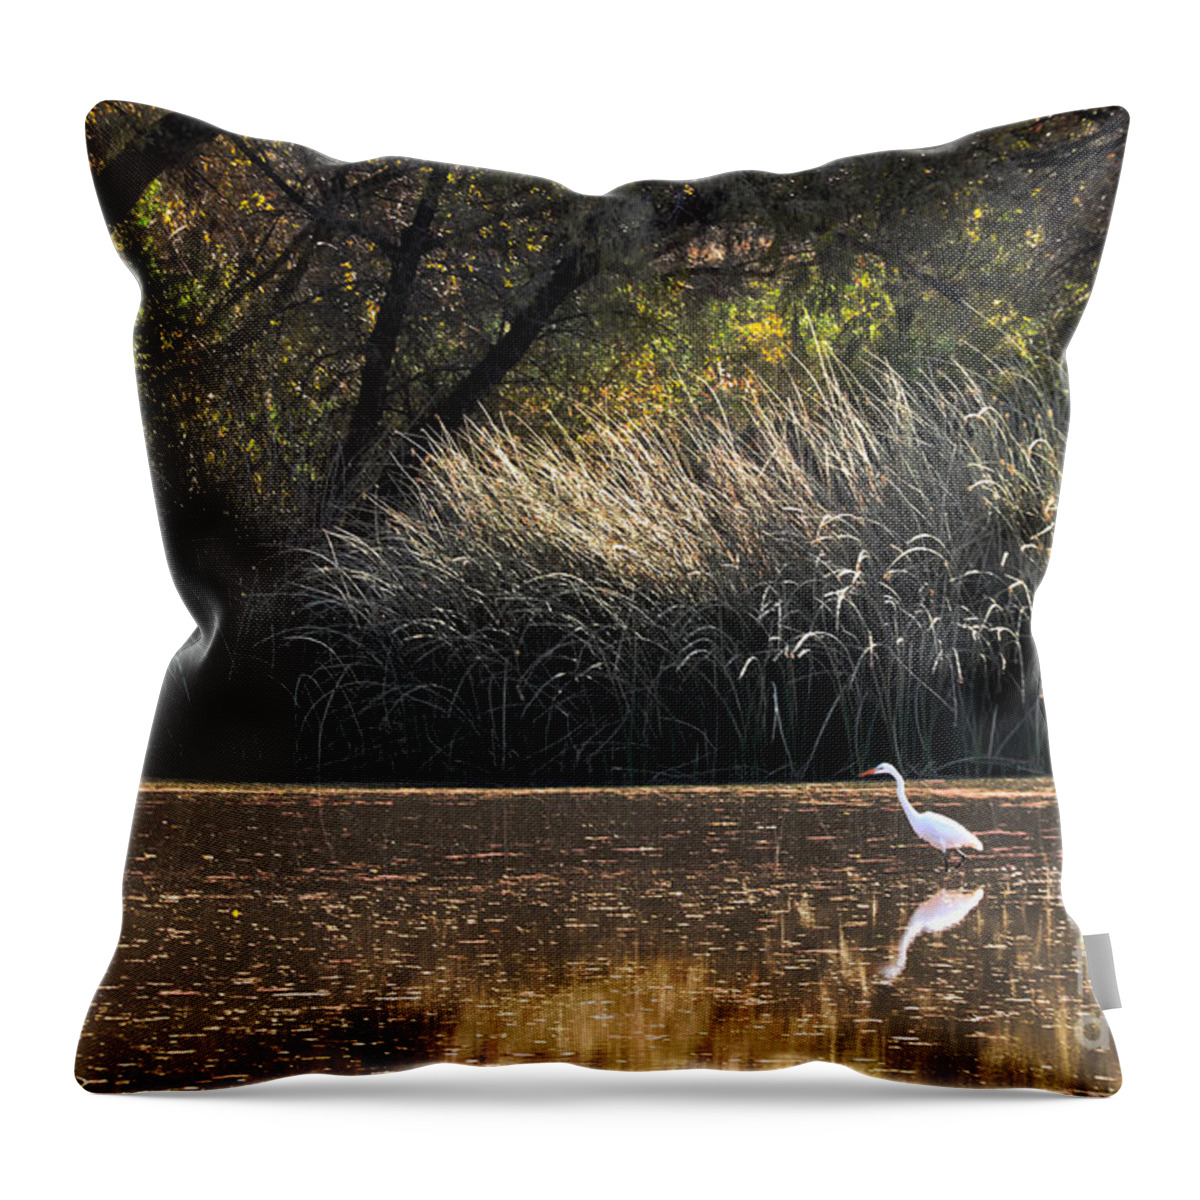 Egret Throw Pillow featuring the photograph Egret Hunting In Pond 2 by Al Andersen